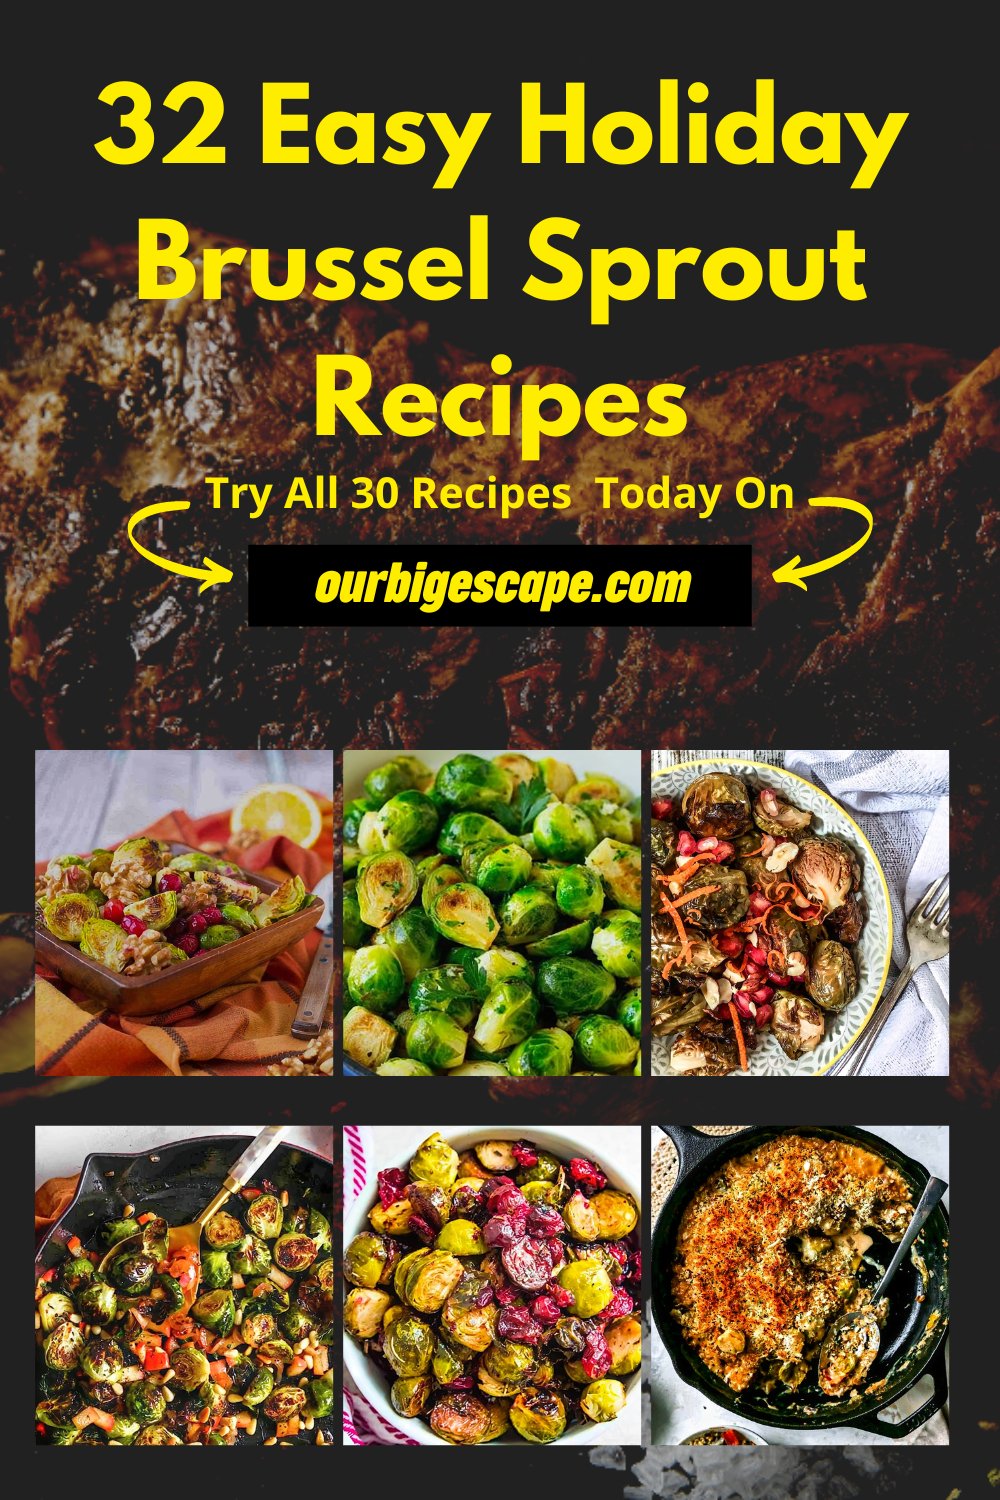 32 Easy Holiday Brussel Sprout Recipes